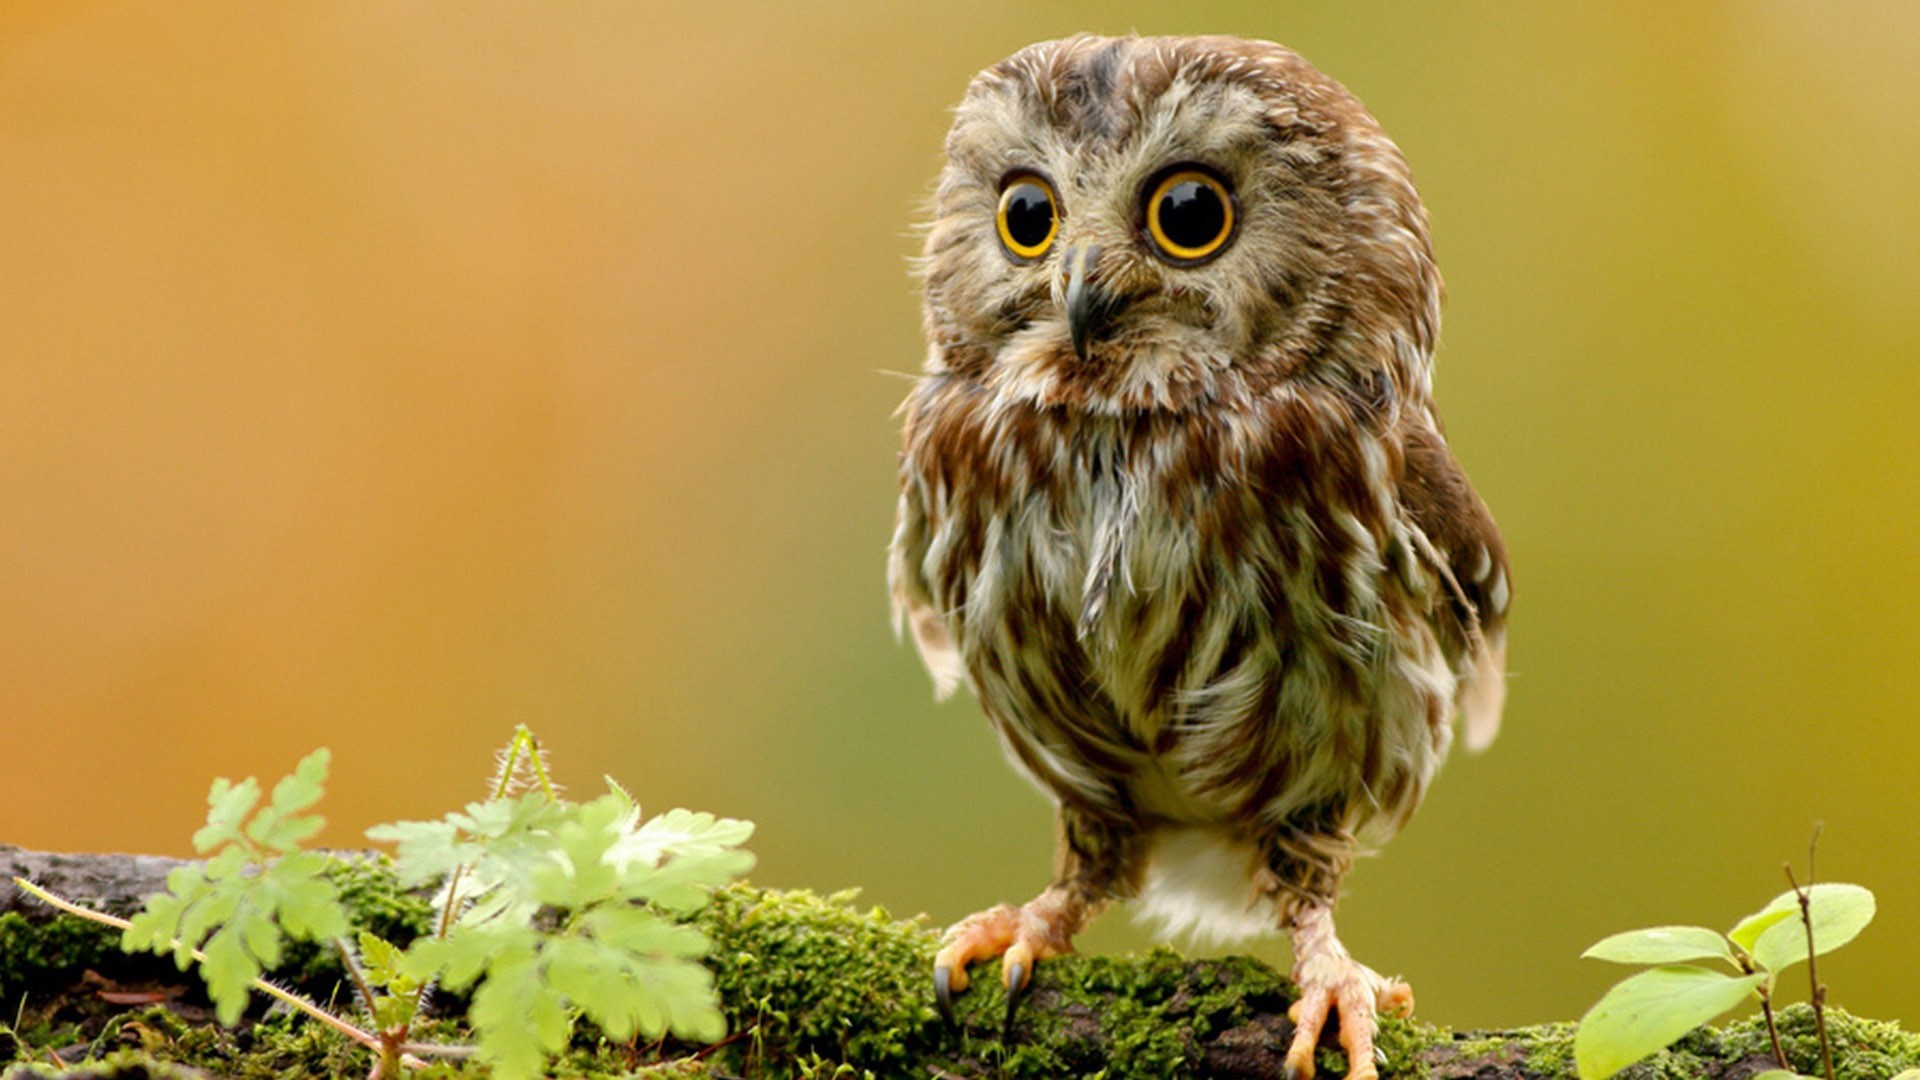 Baby Owl Birds Images | HD Wallpapers Bot